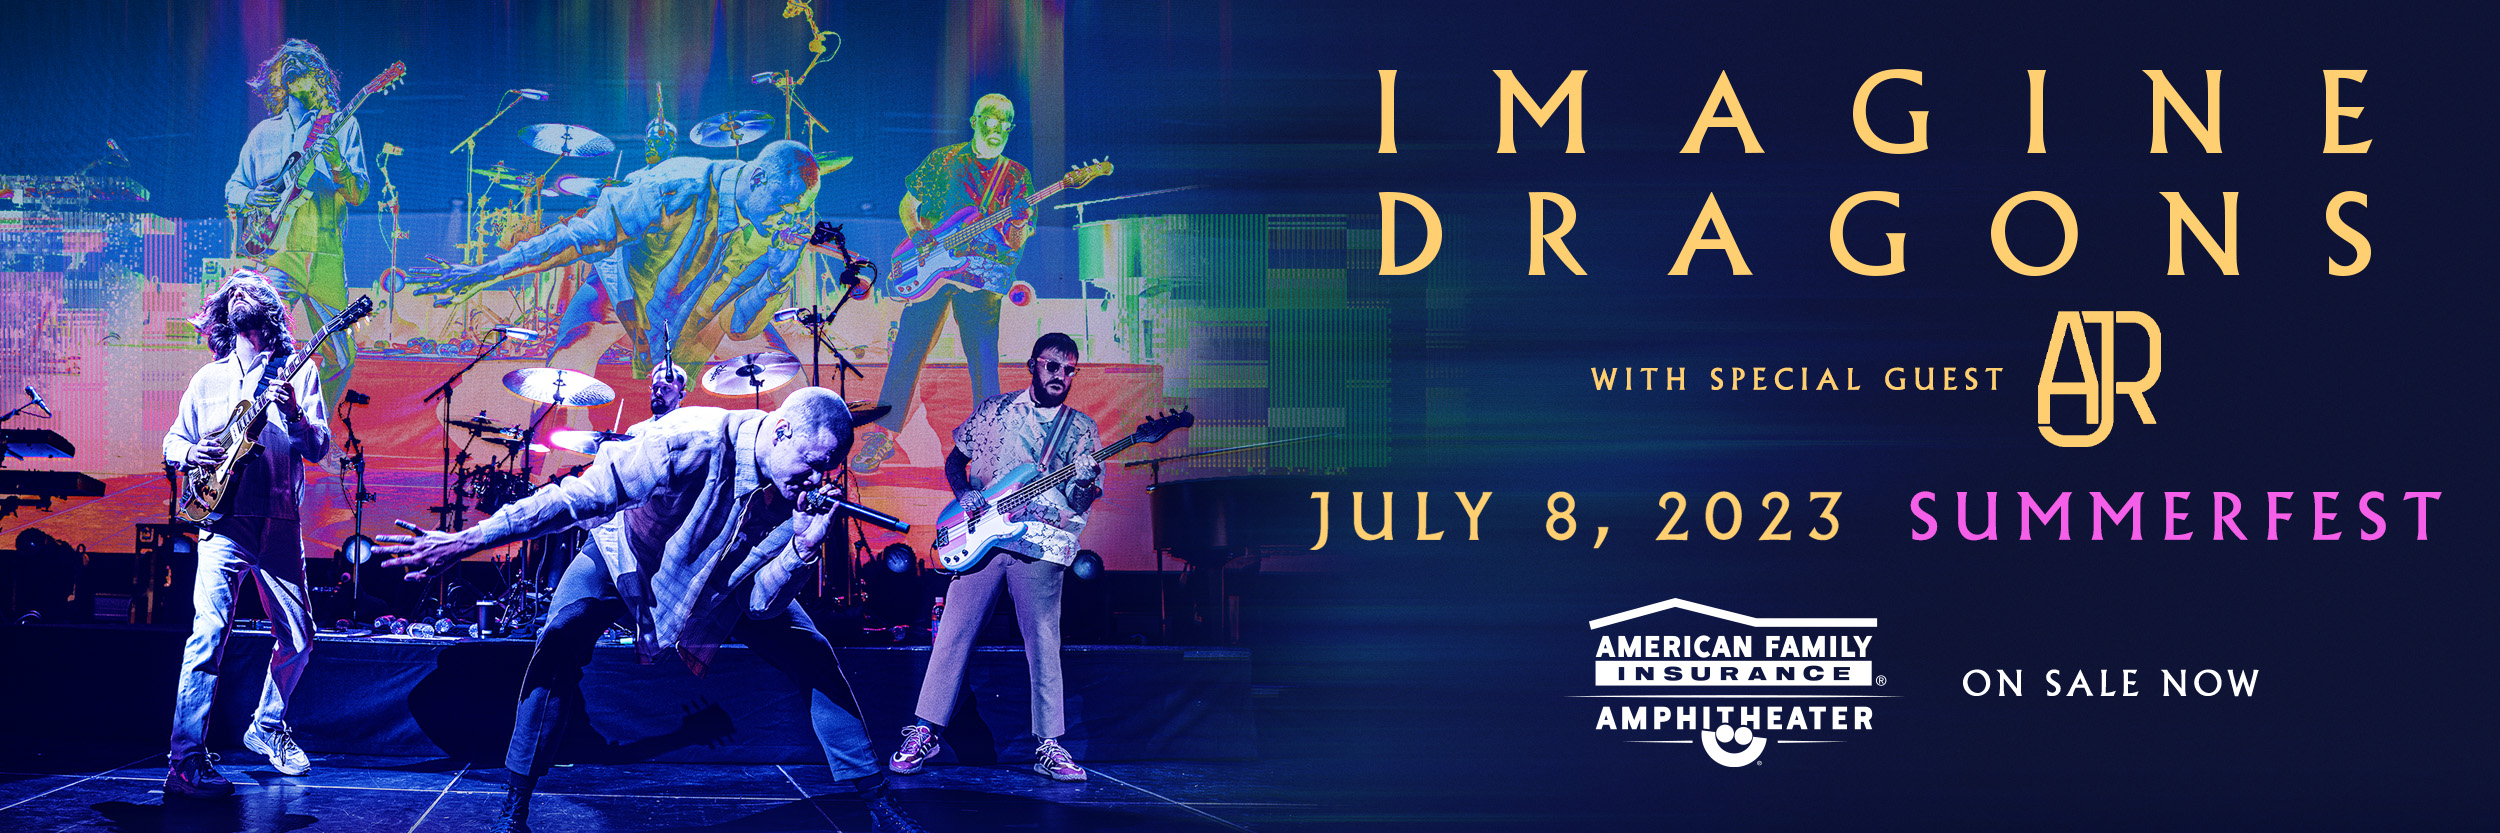 Imagine Dragons continue to redefine rock in the 21st century. Now's your chance to see them live and in concert when they headline the American Family Insurance Amphitheater during Summerfest on Saturday, July 8, 2023